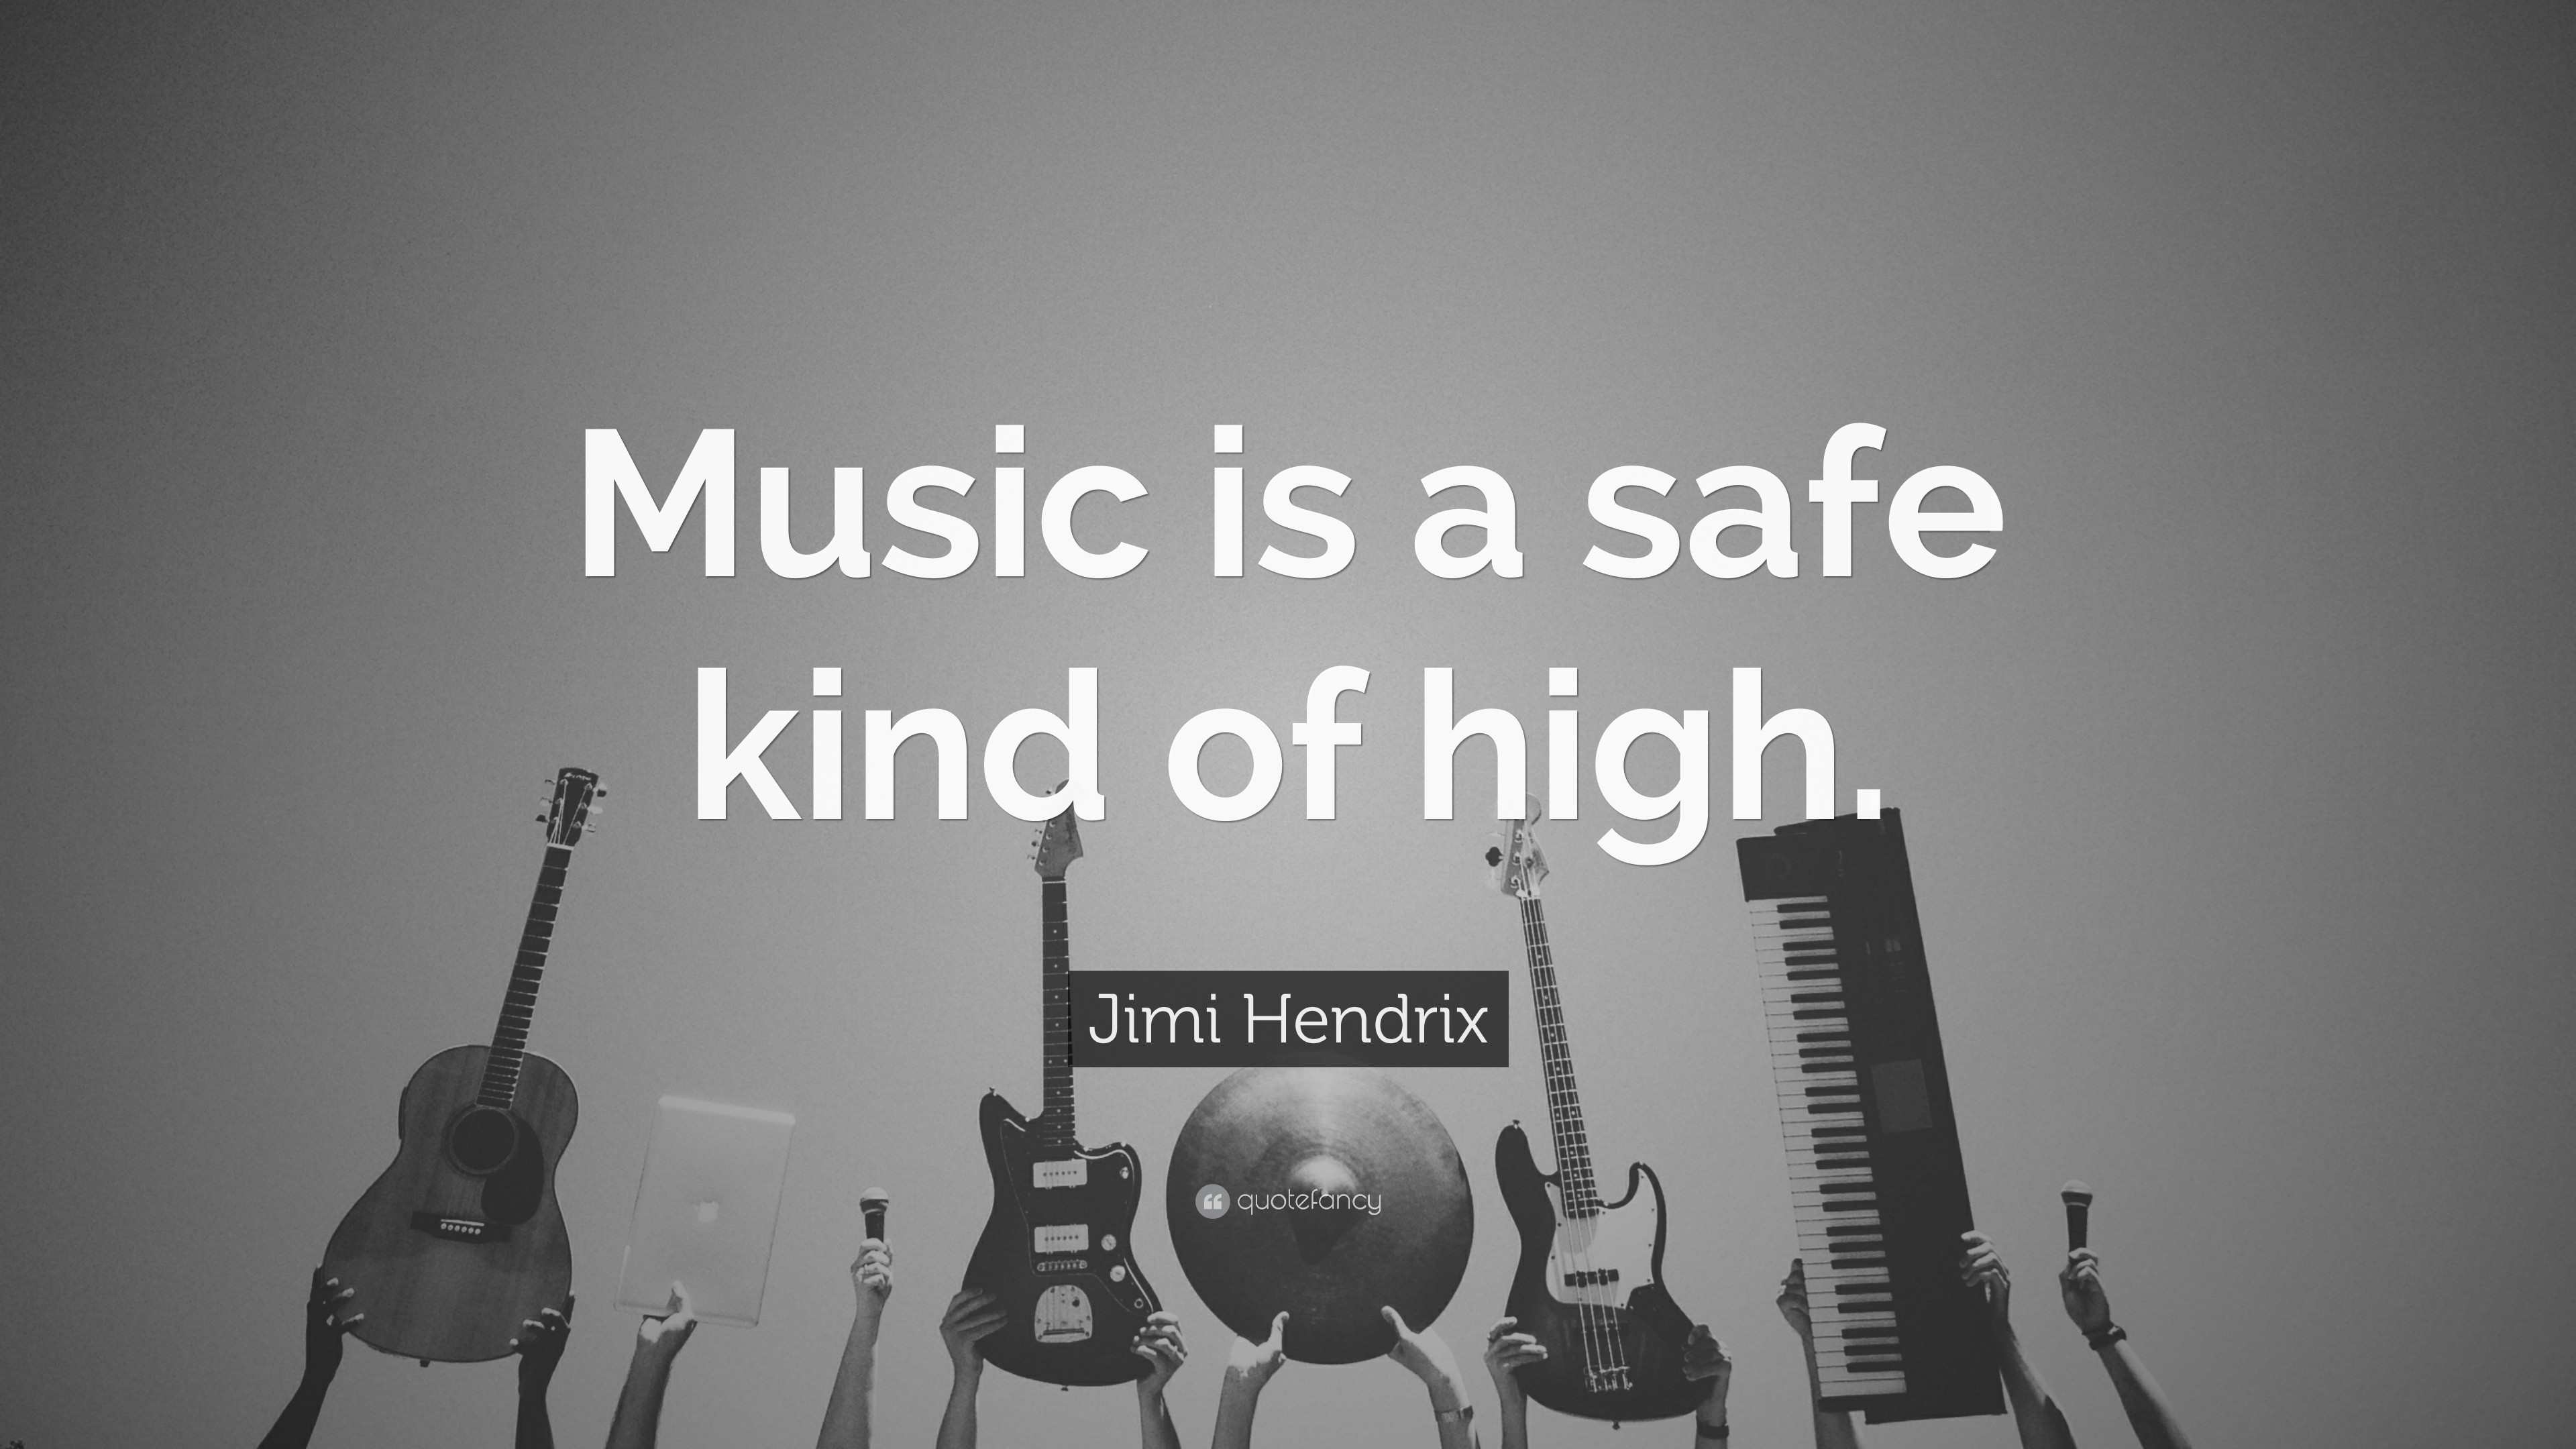 3840x2160 Music Quotes: “Music is a safe kind of high.” — Jimi Hendrix